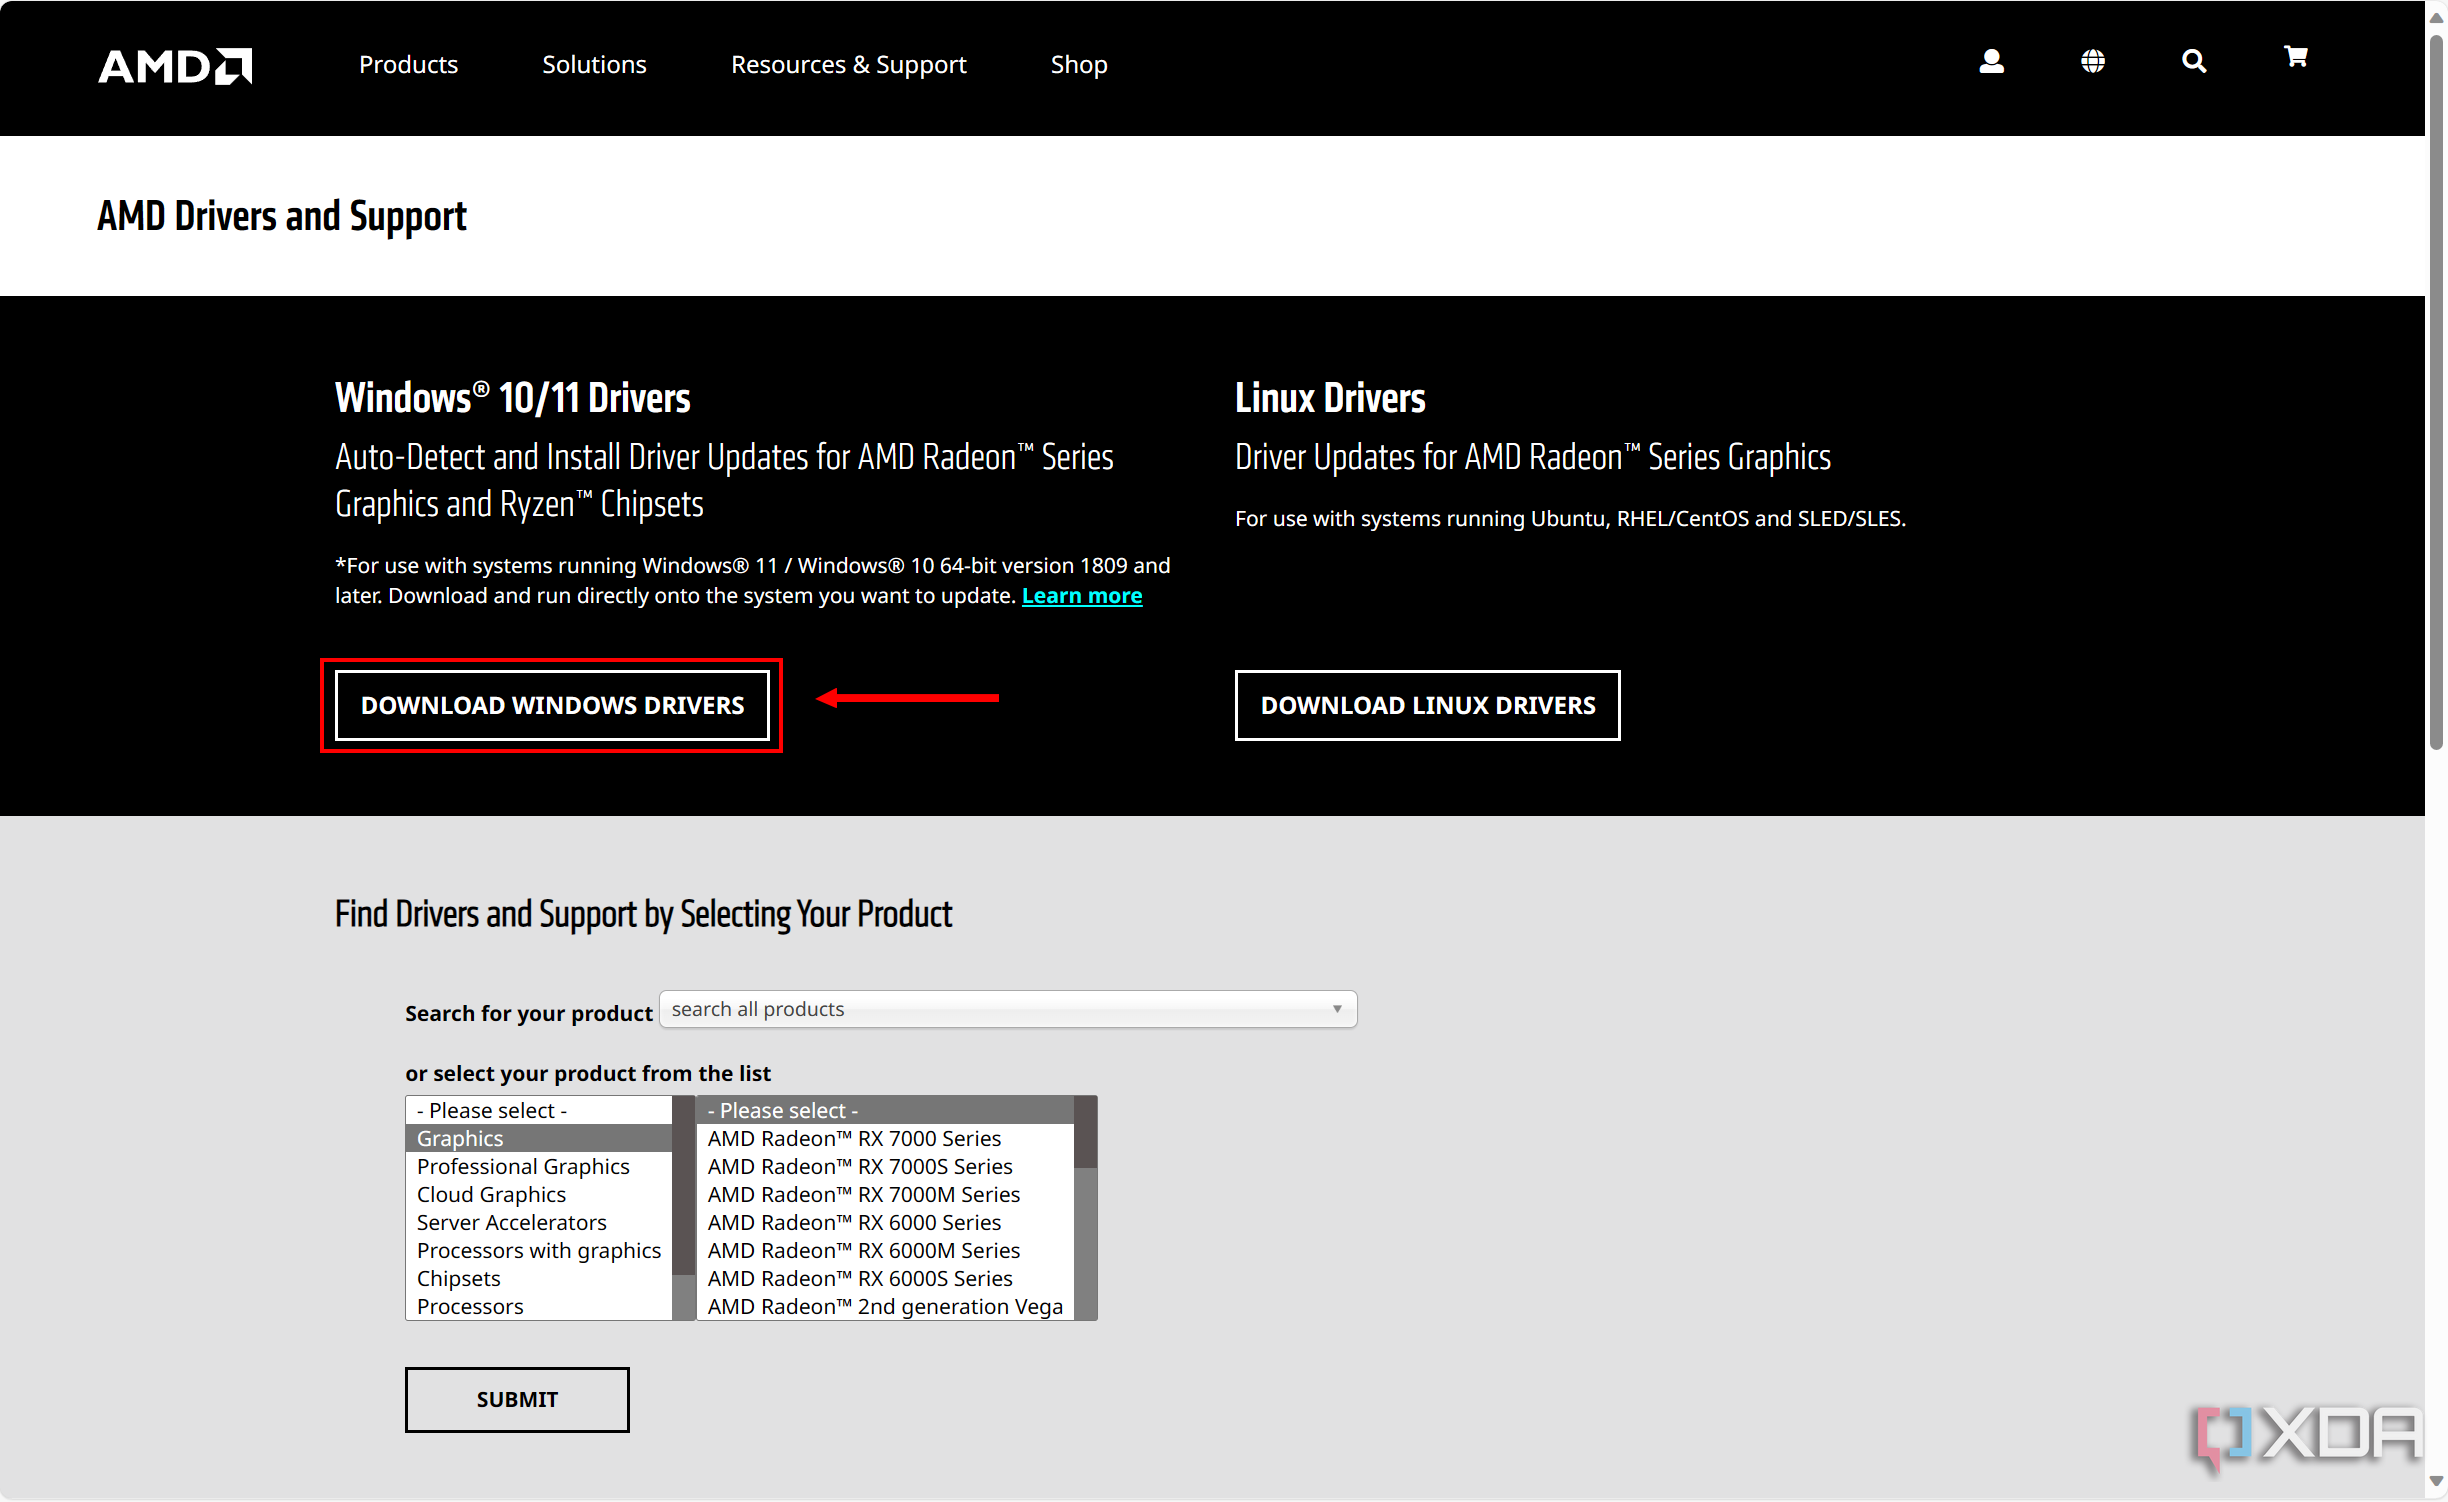 Screenshot of AMD's support website with the Download Windows Drivers button highlighted